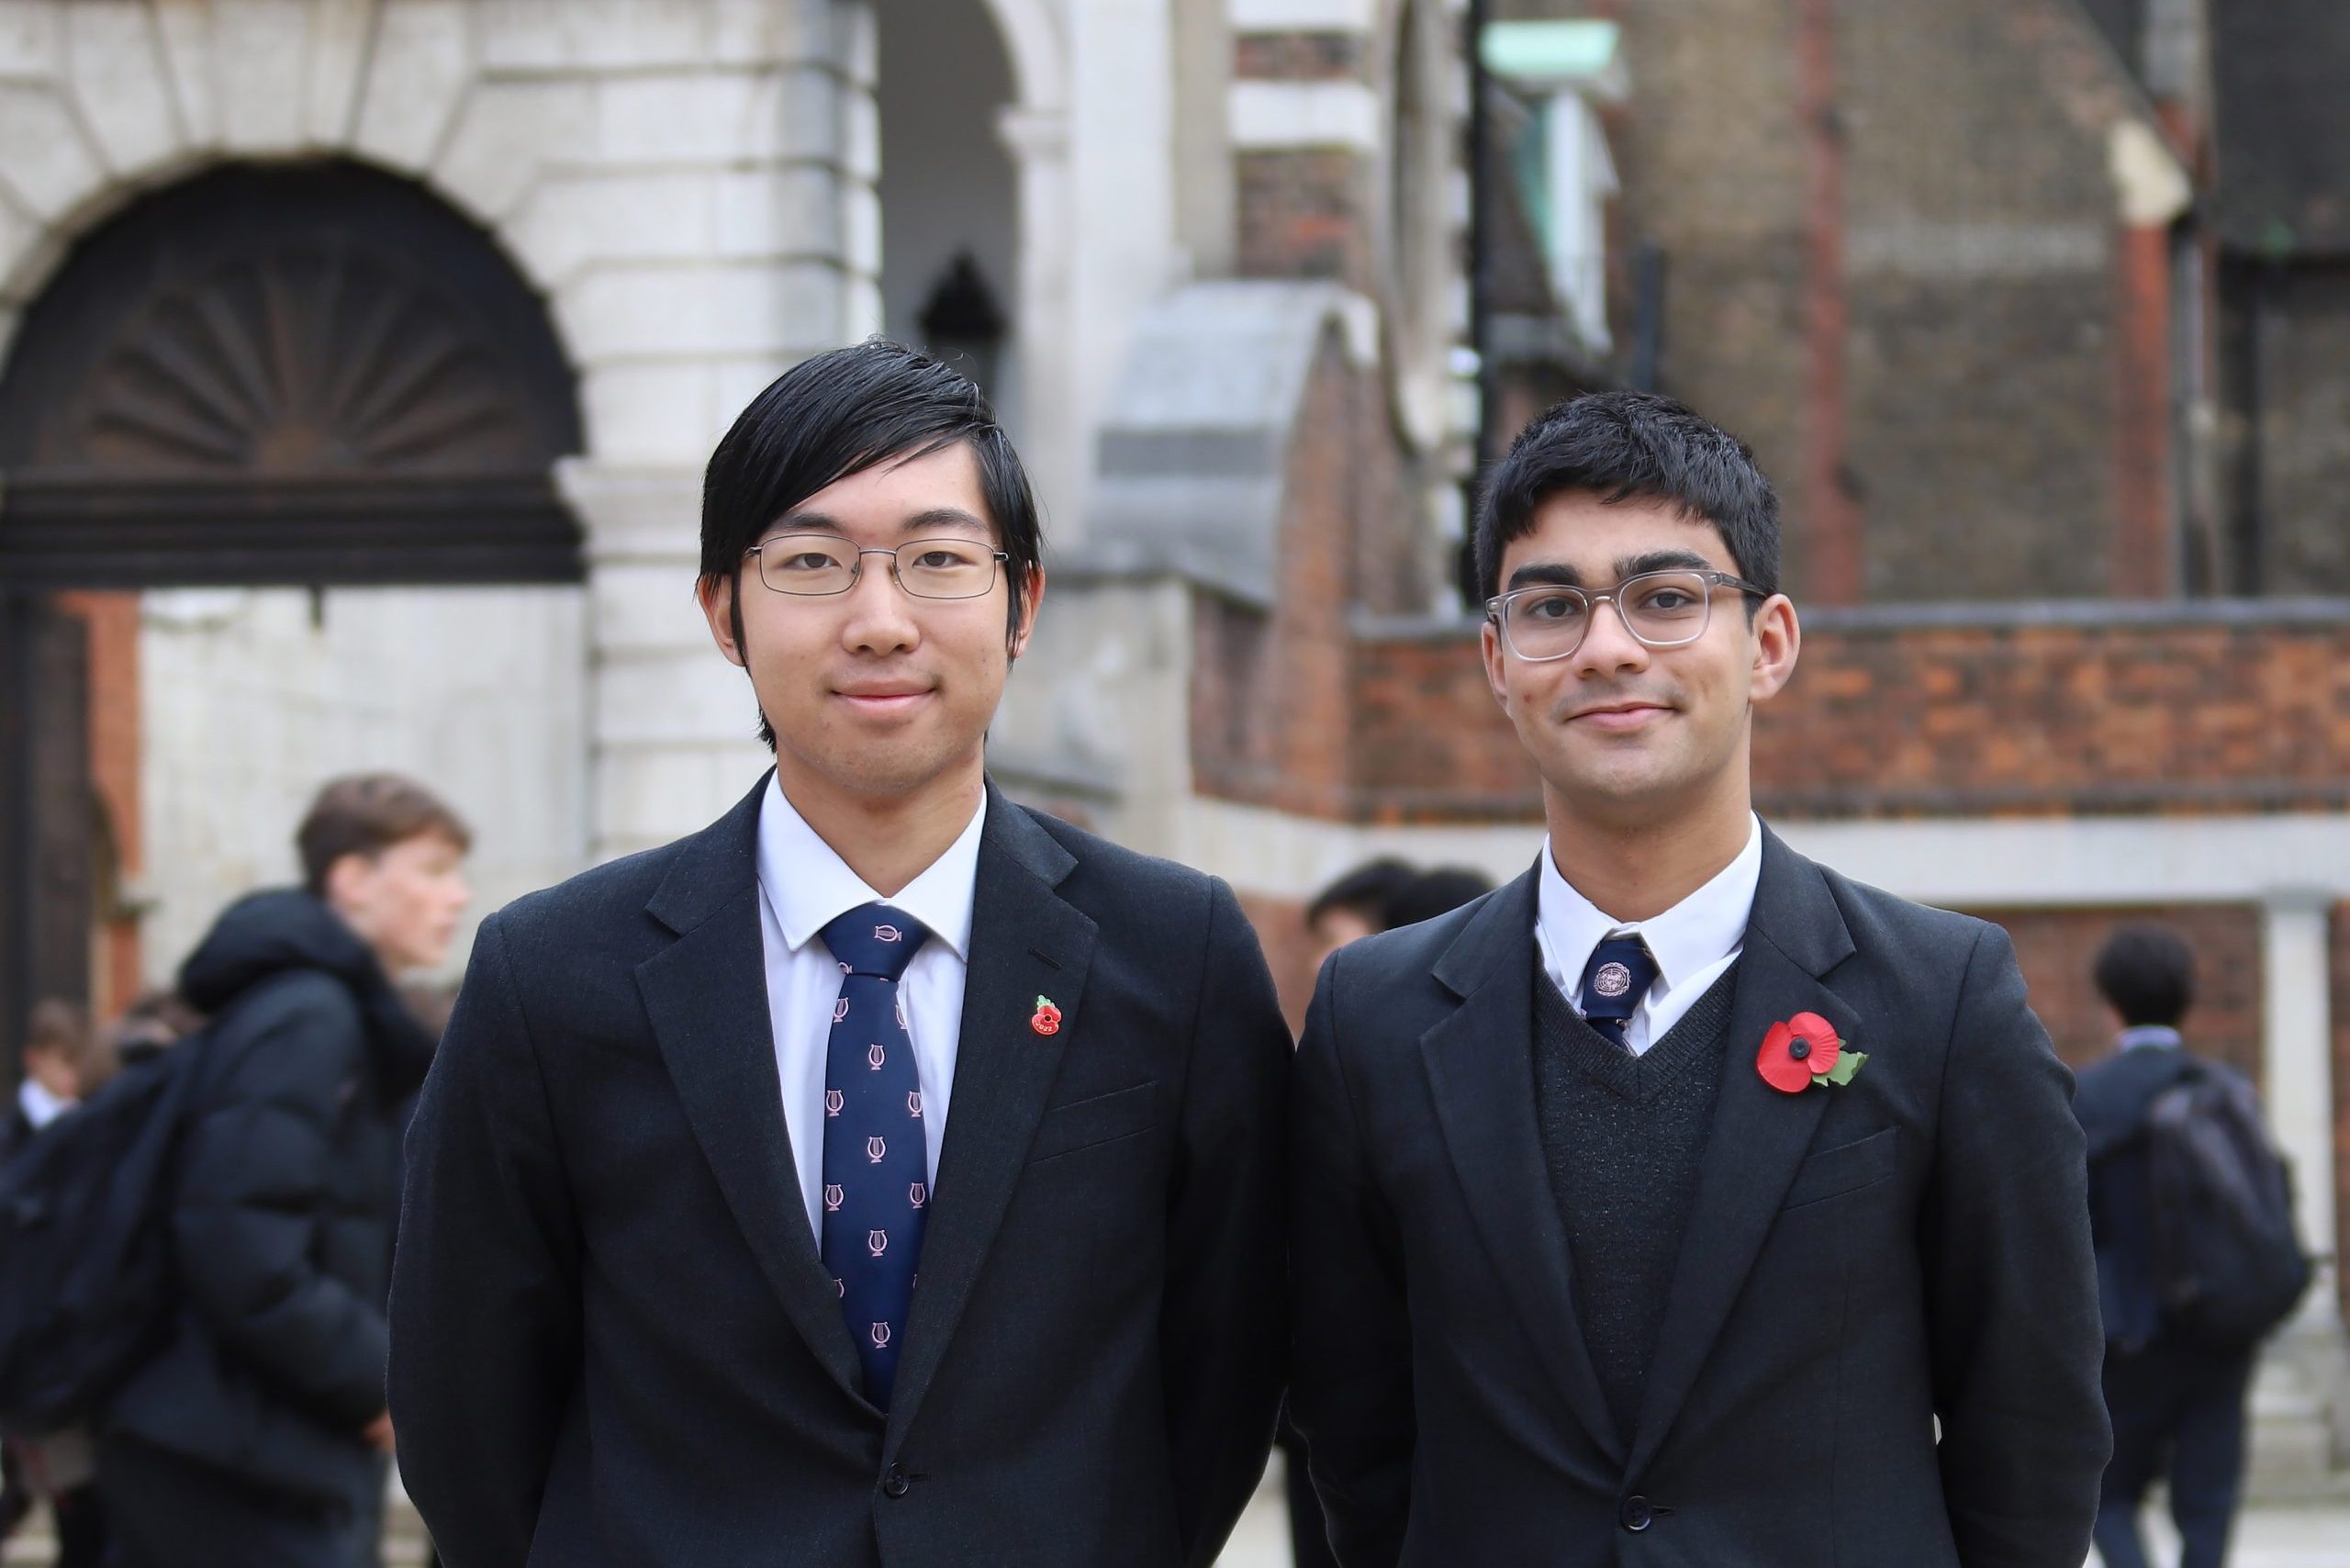 Westminster School’s Japanese language pupils have secured a runners up prize for a video showcasing Japan’s ‘coolness’